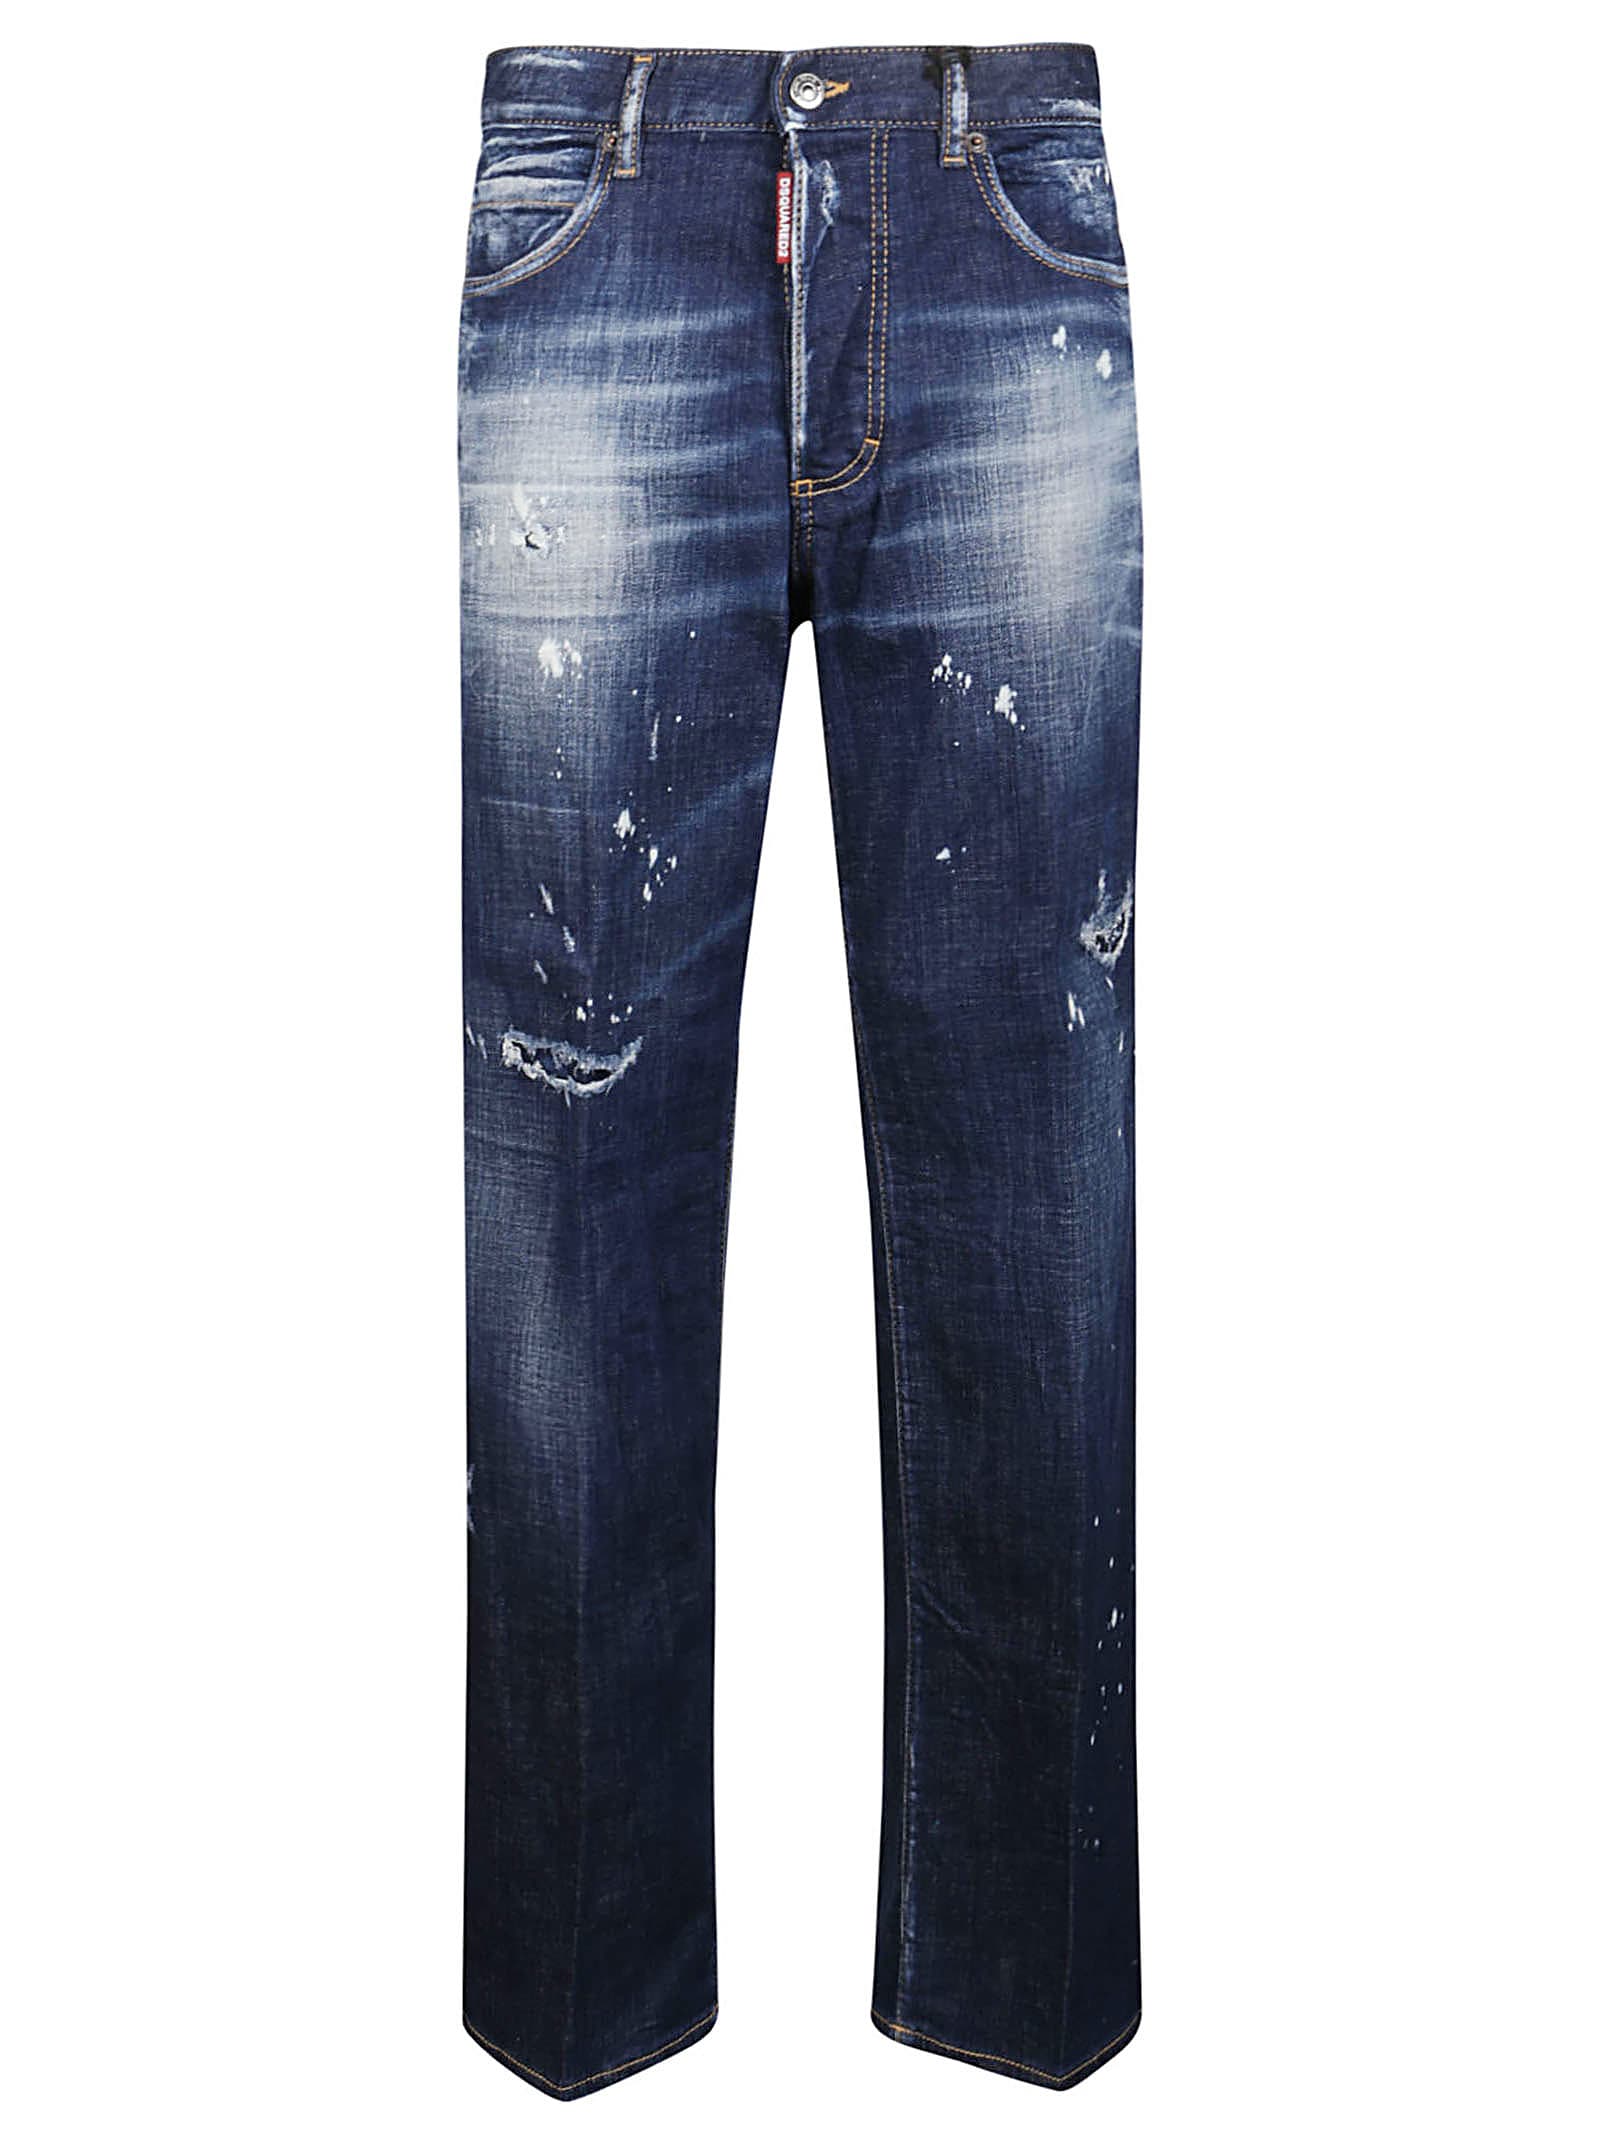 DSQUARED2 SAN DIEGO JEANS